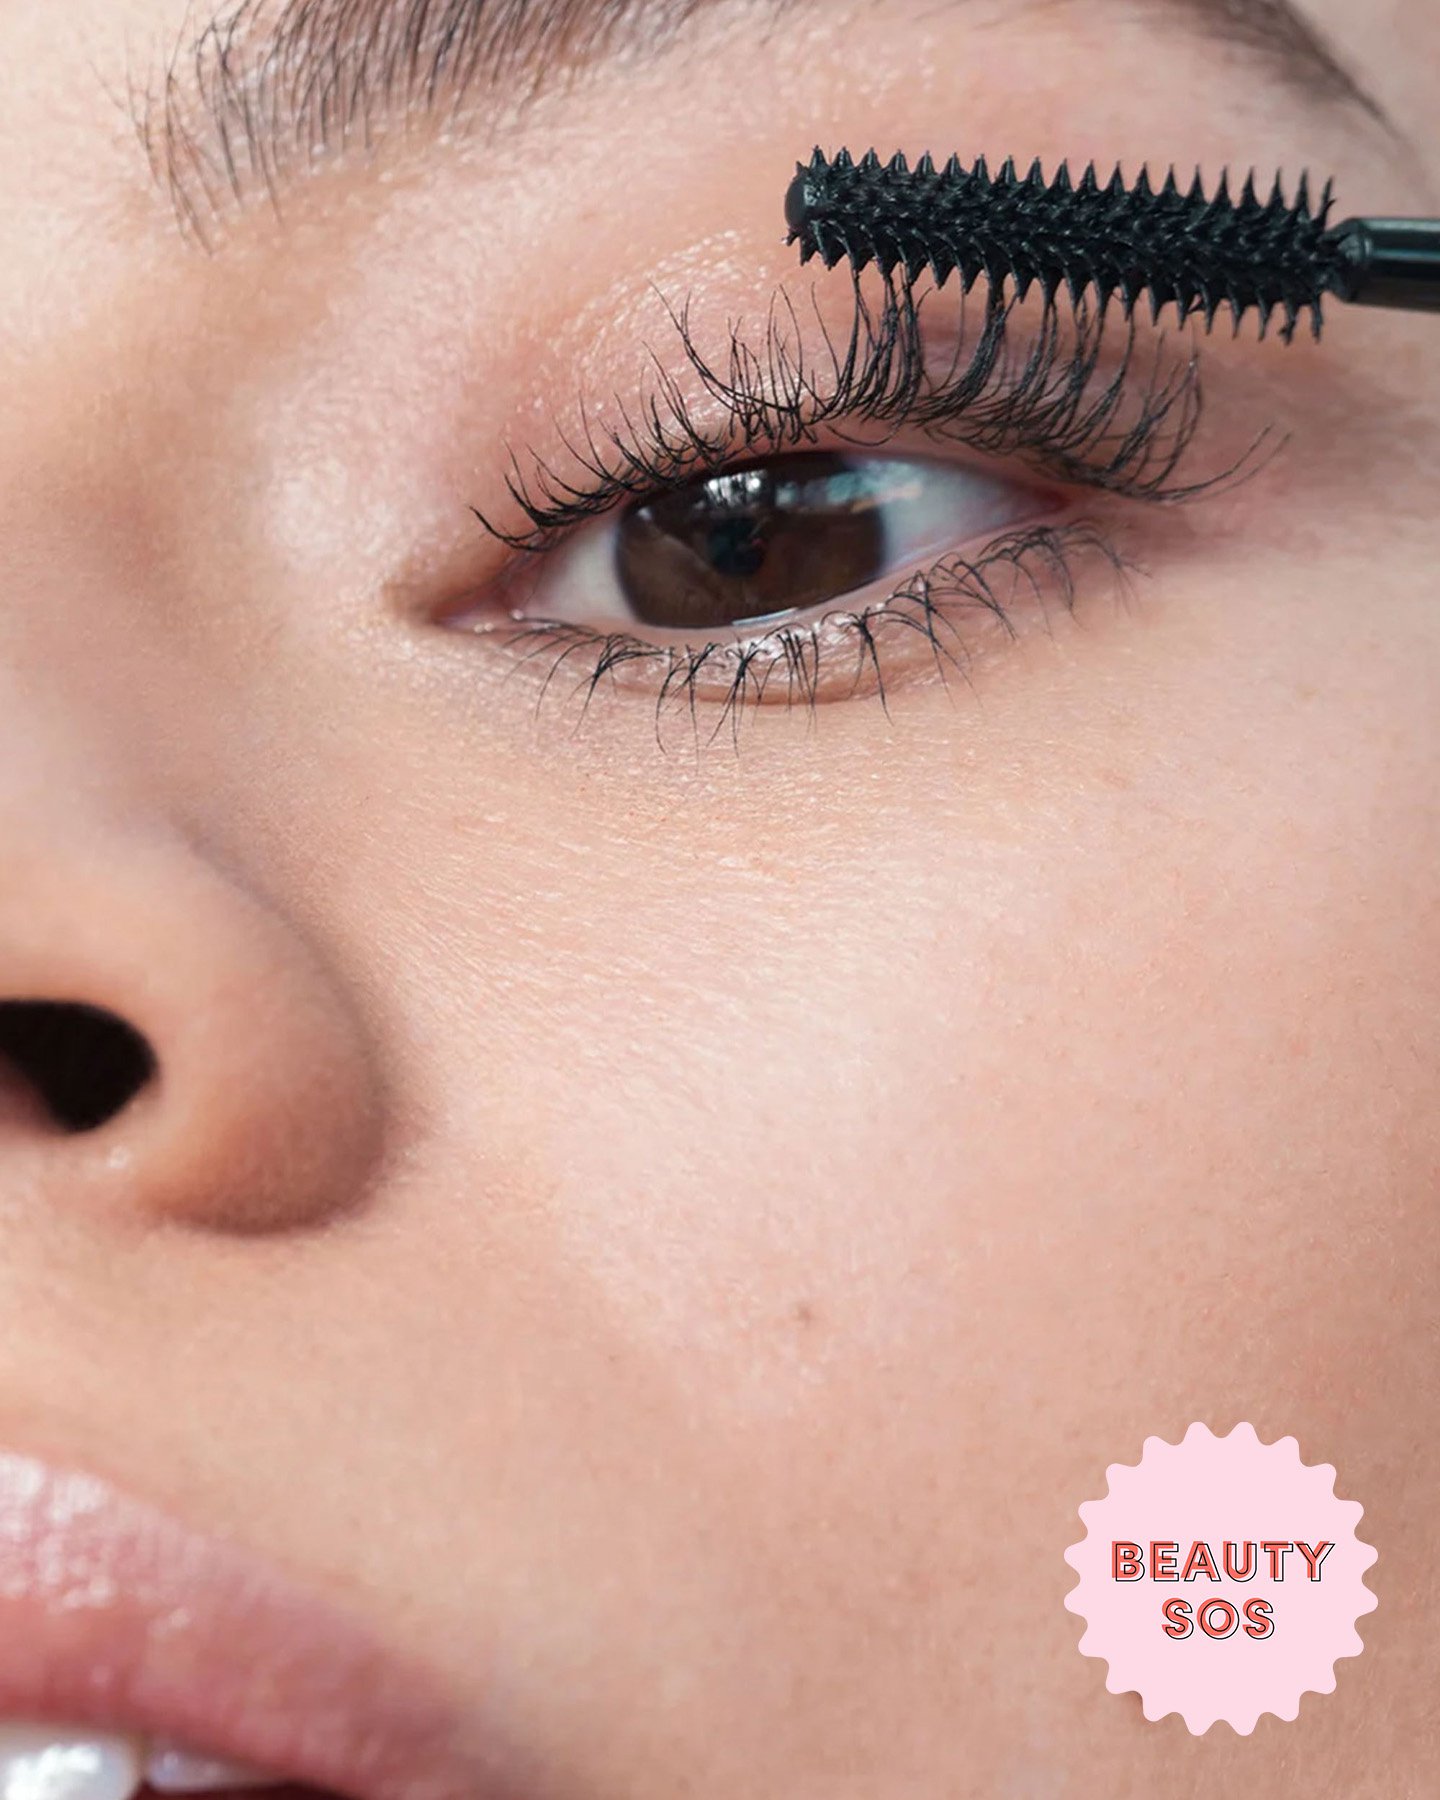 How To Apply Mascara So Smudge, Clump Or Flake